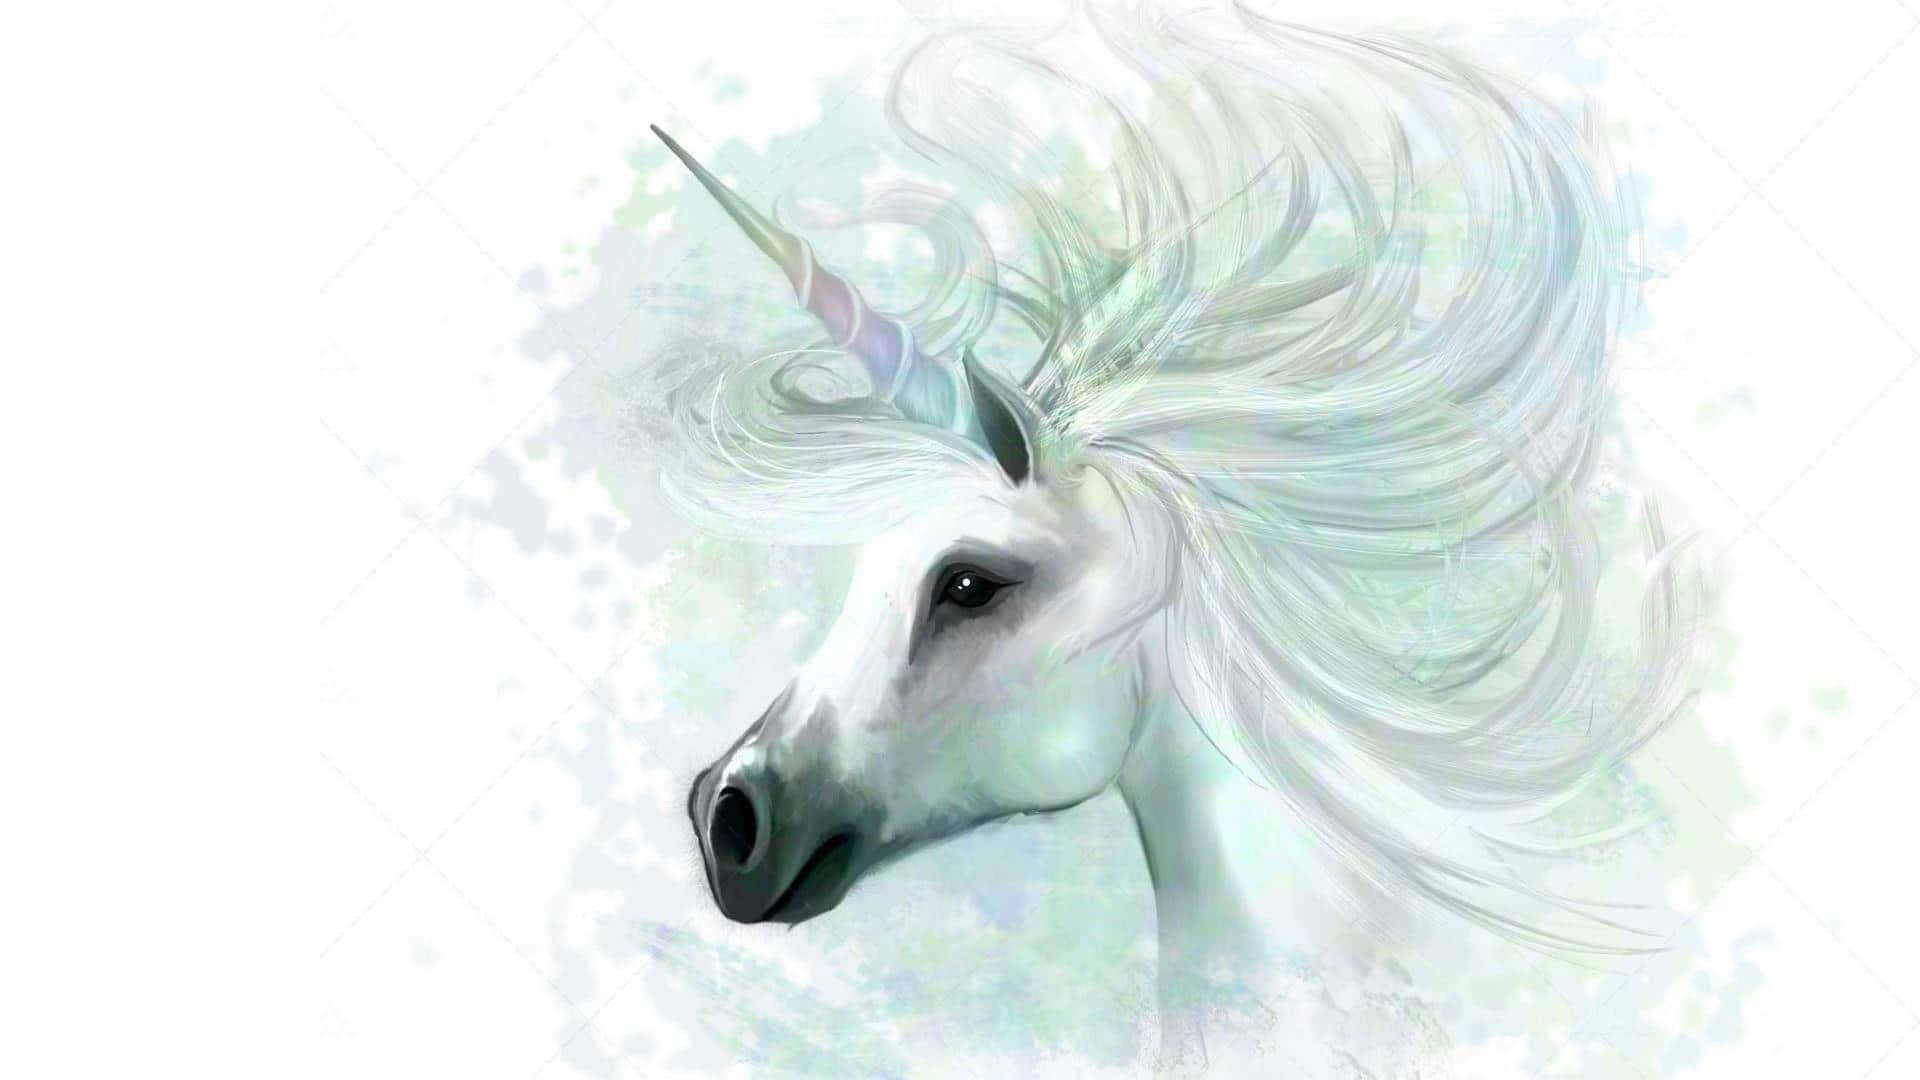 Enter the magical fantasy world of Unicorns with this desktop wallpaper Wallpaper